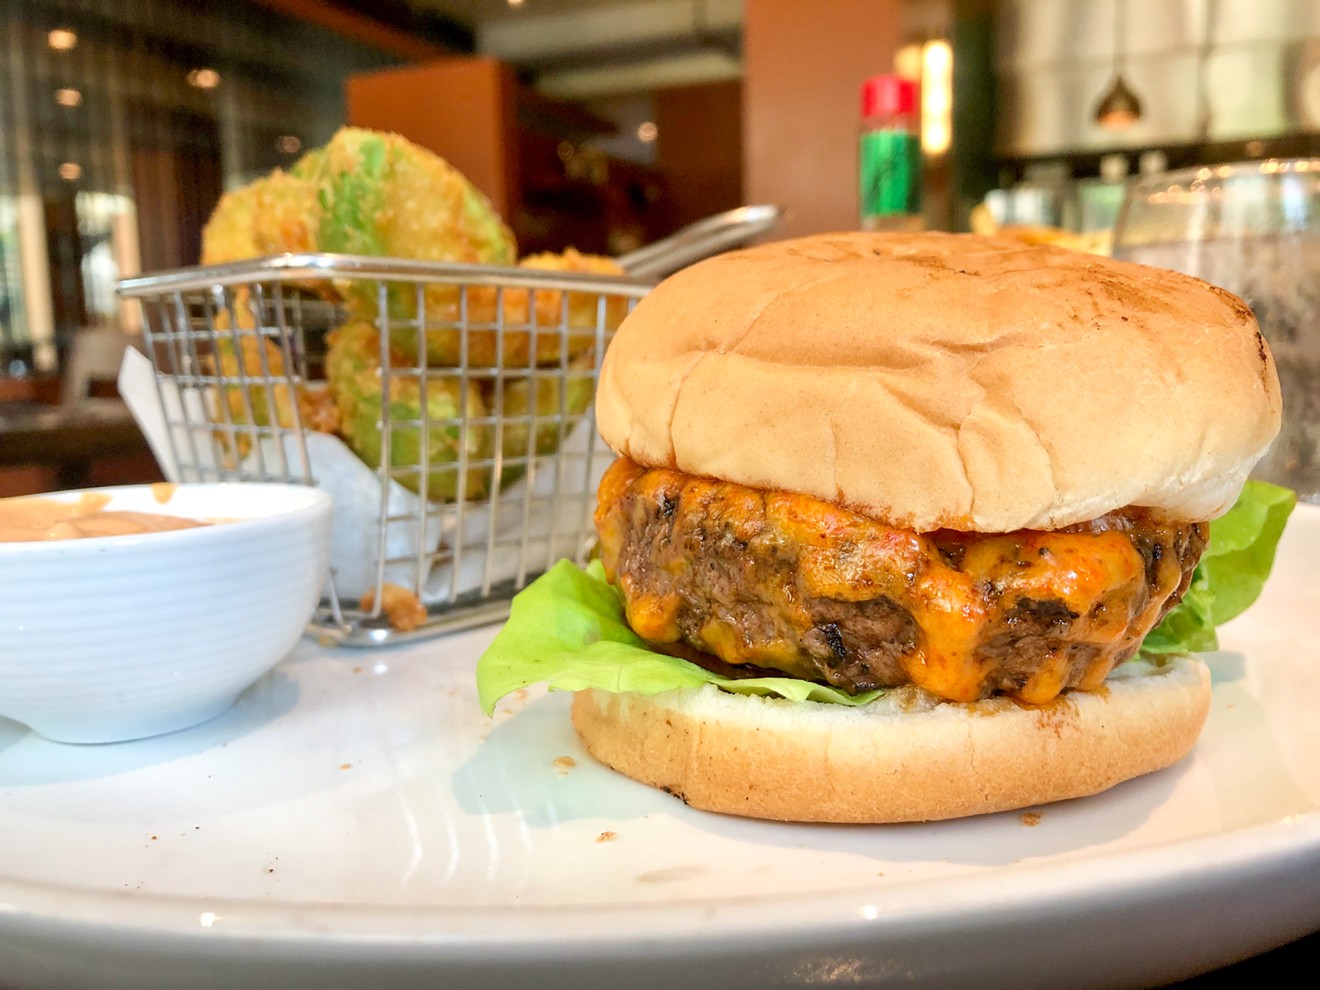 Thank you, Knife, for sharing how good a burger really can be.